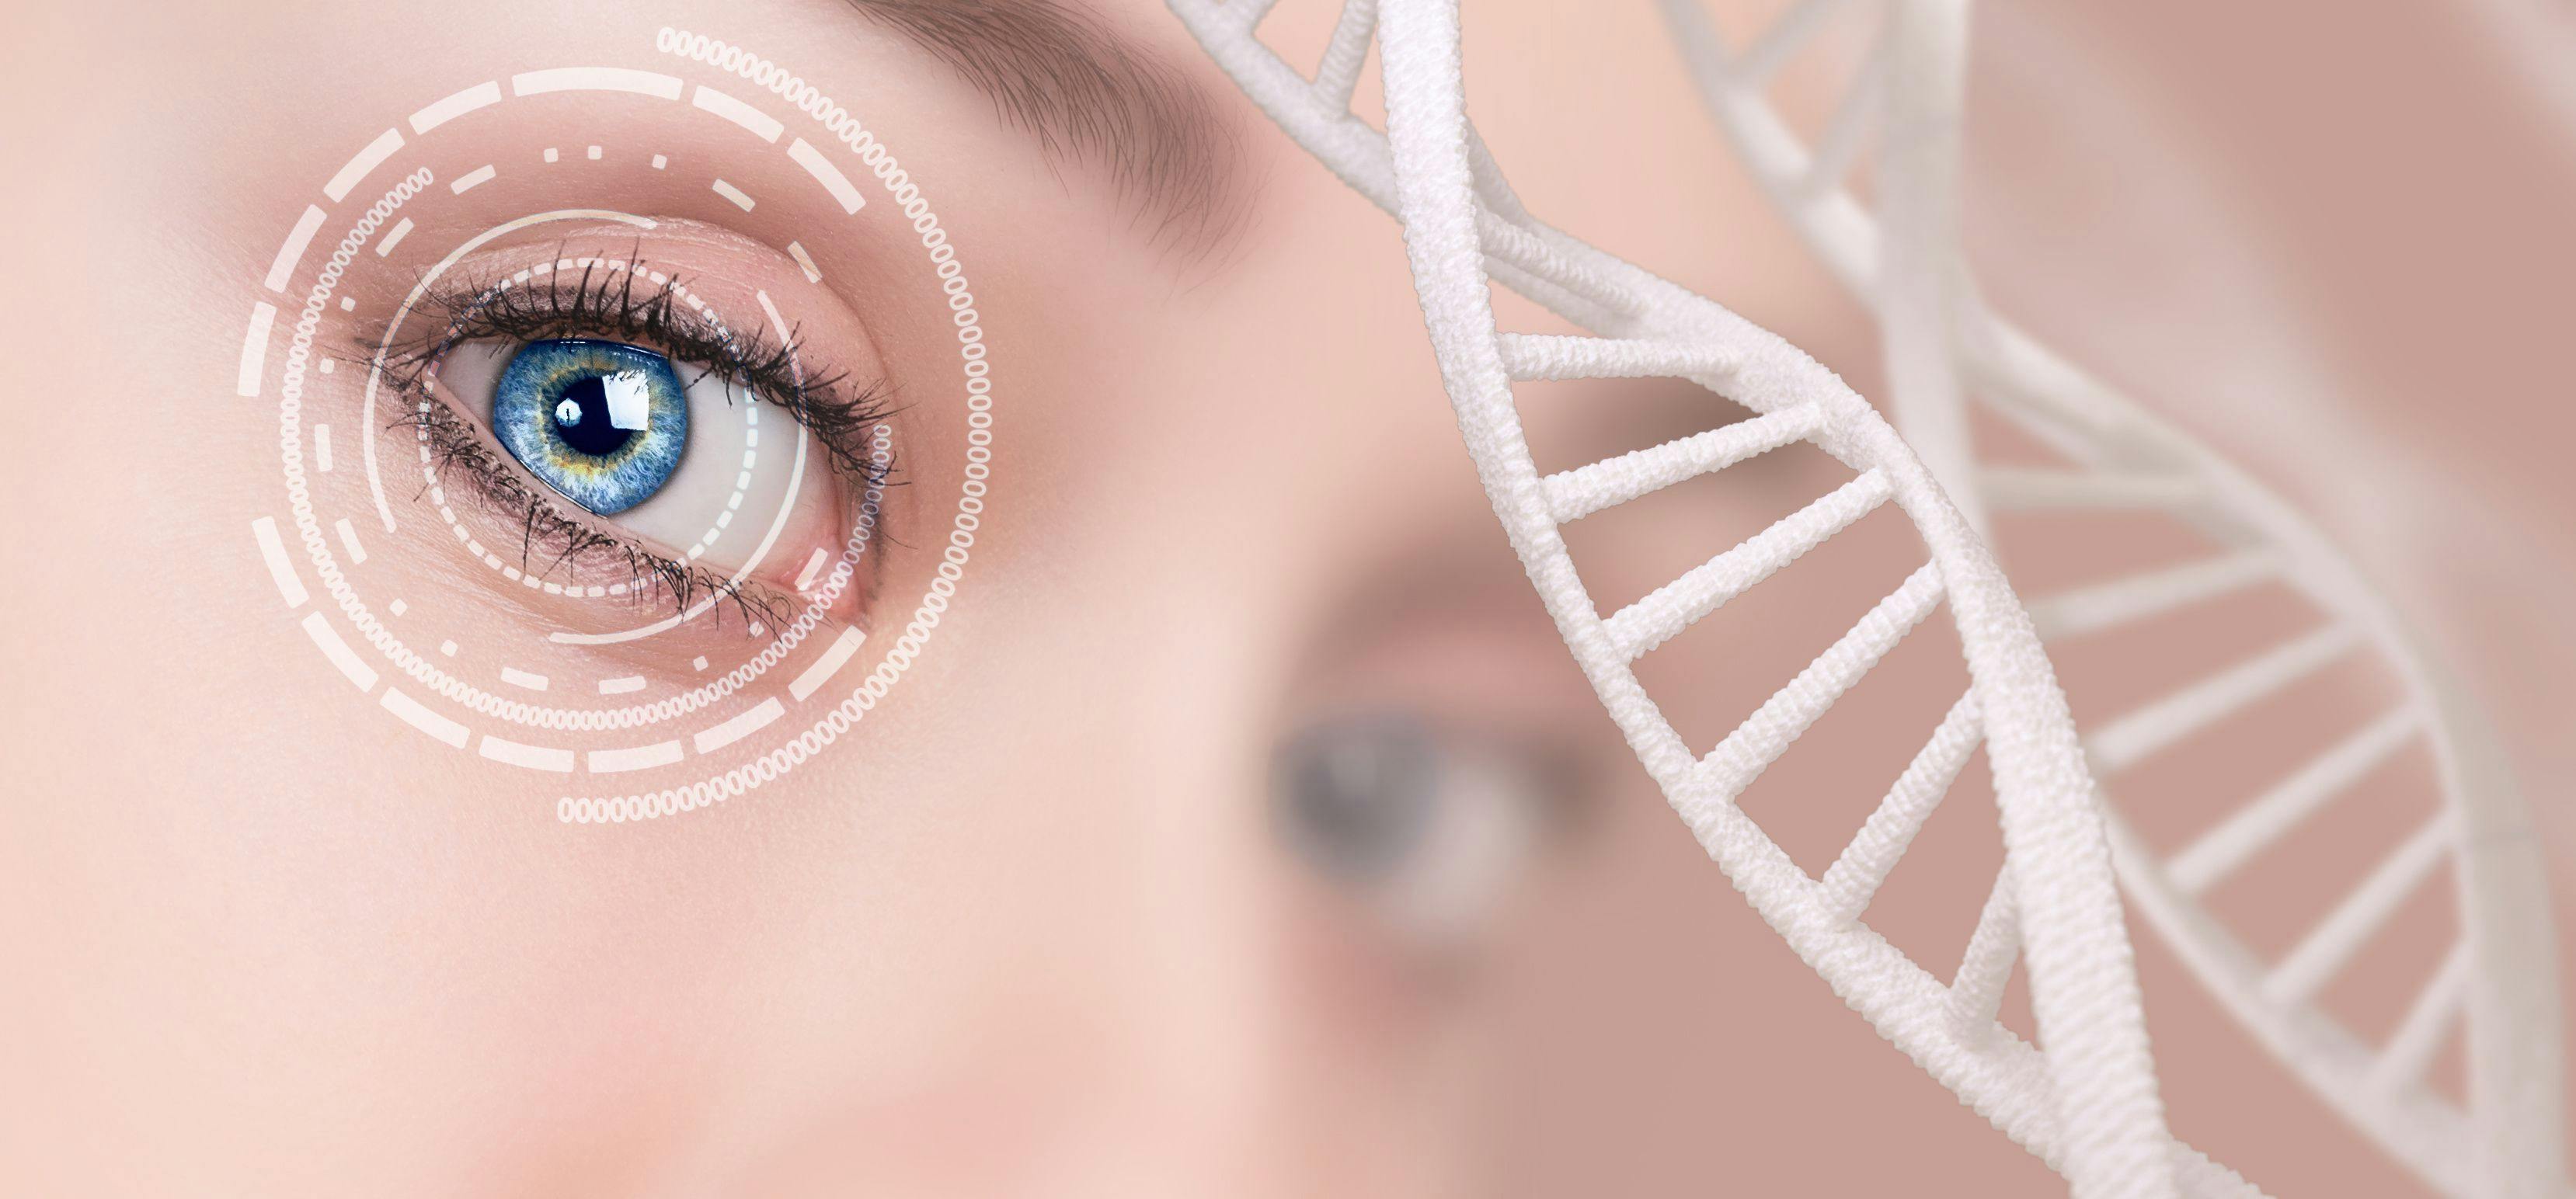 Novel gene therapy shows promise for treating multiple eye diseases